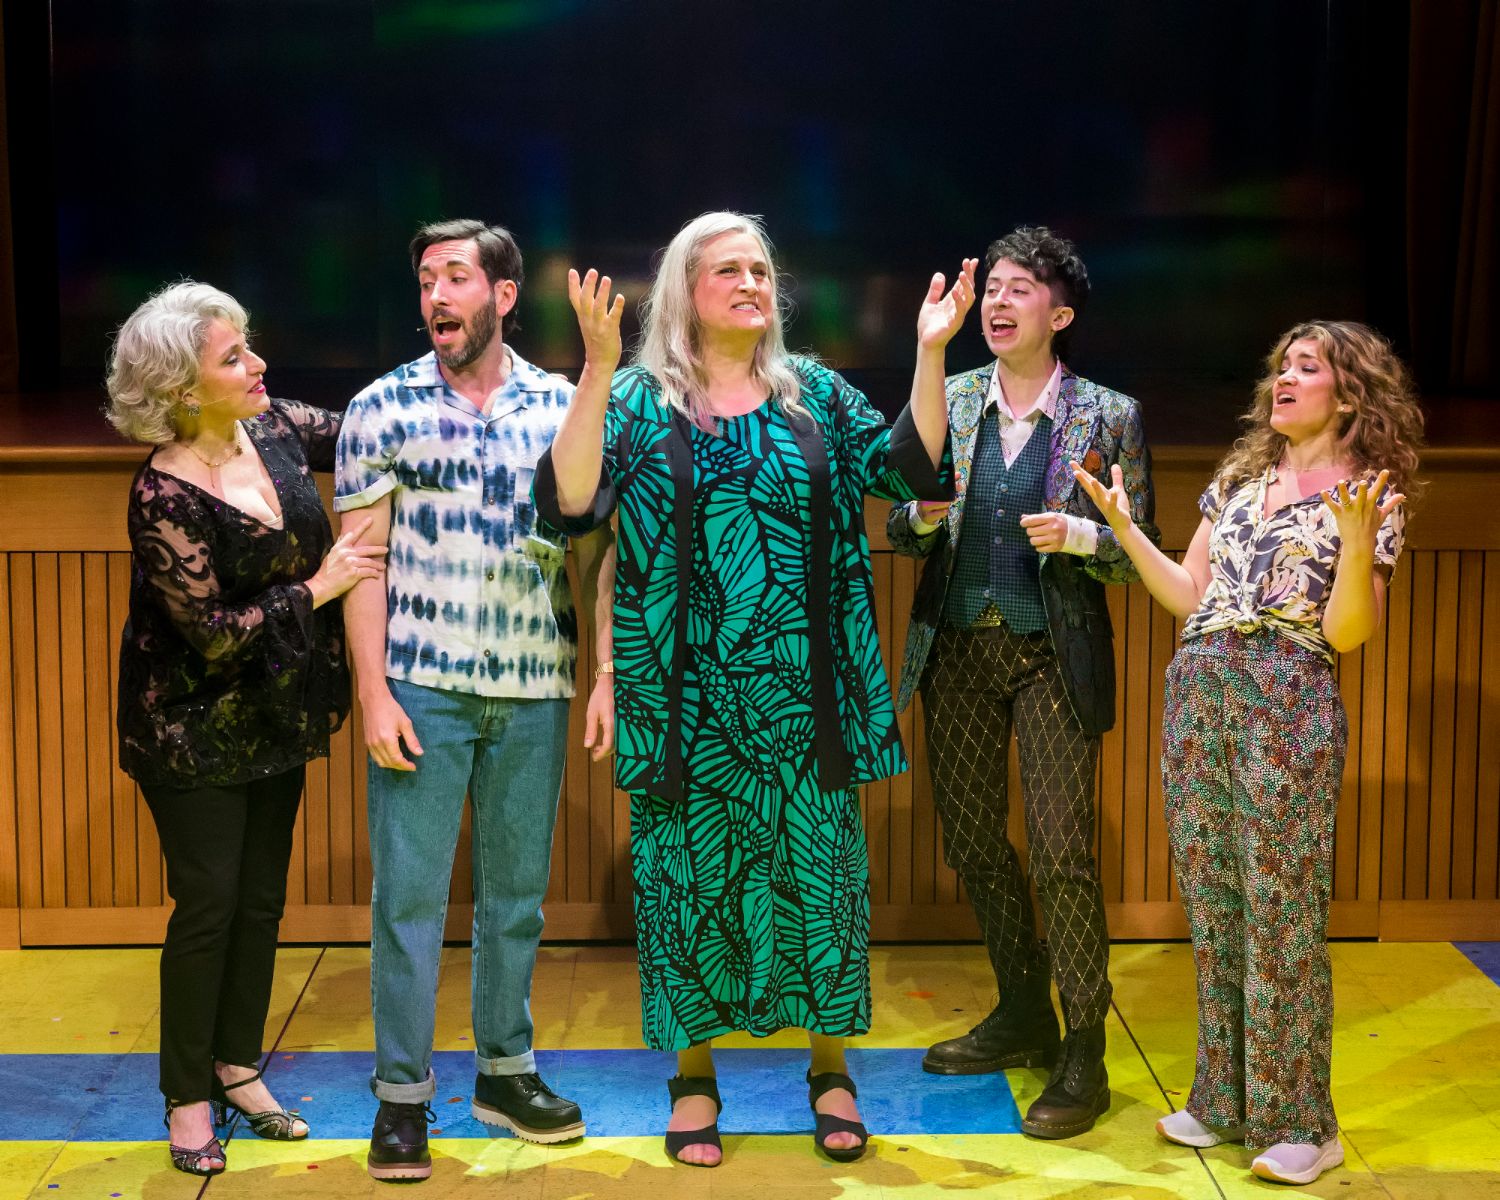 PHOTO: Craig Schwartz | The South Pasadenan | From L to R: Liz Larsen, Zachary Prince, Daya Curley, Adina Verson, and Sarah Stiles in the world premiere of "A Transparent Musical" at Mark Taper Forum May 23 through June 25, 2023.